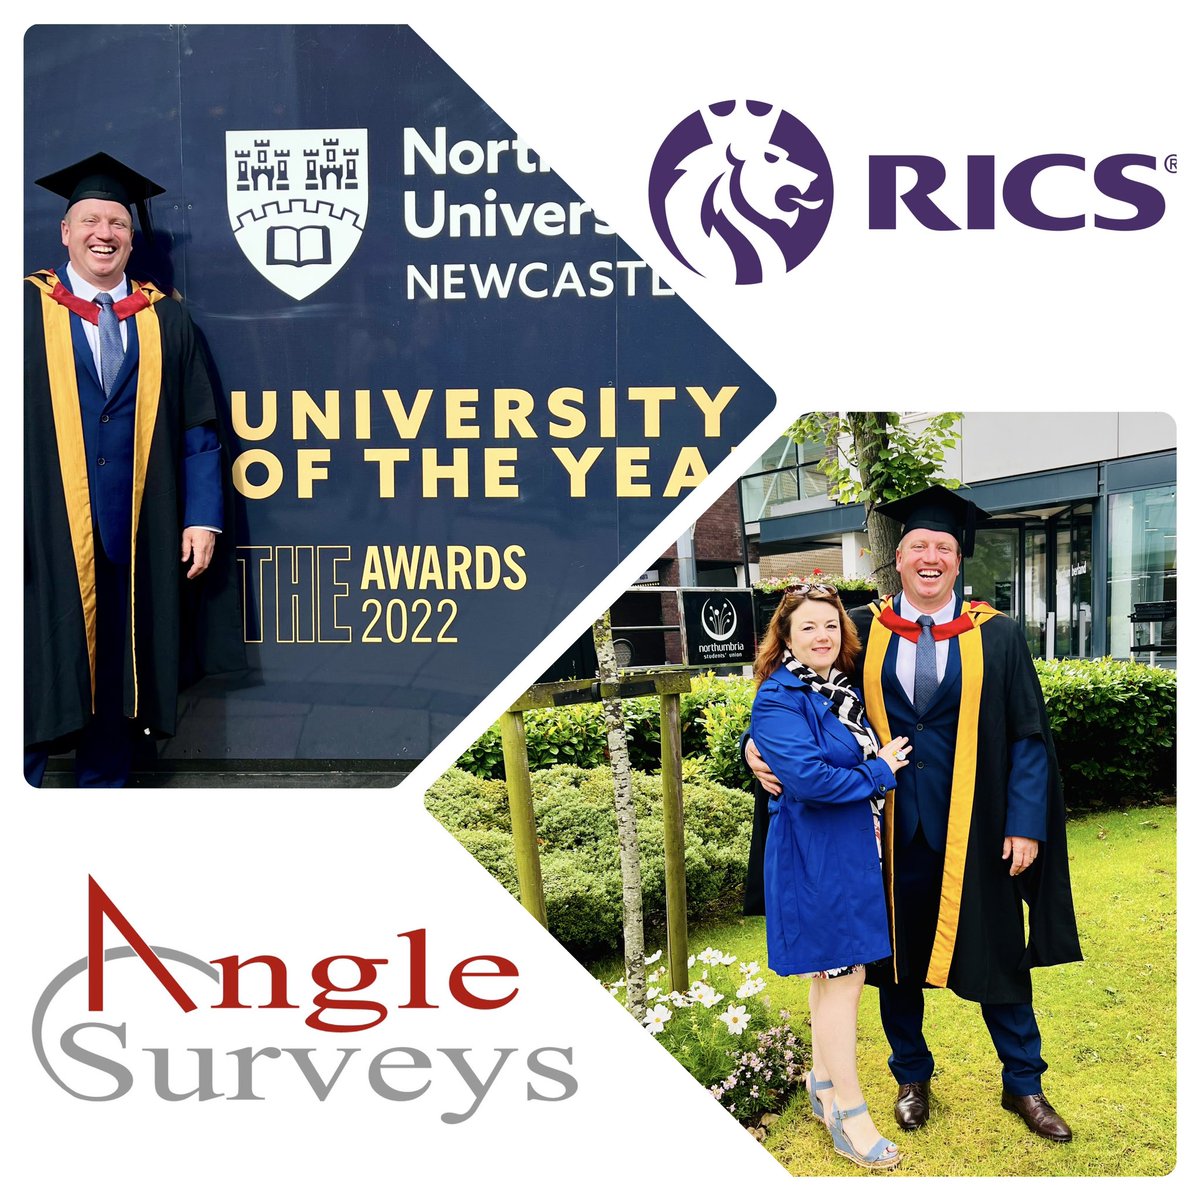 Thank you very much to the award winning @NorthumbriaUni for such a wonderful Masters graduation event & celebration! It’s truly been a day to remember!  #takeontomorrow #THEAwards #everyanglecovered #northumbriauniversity #RICSaccreditedMSc #RICS #graduation